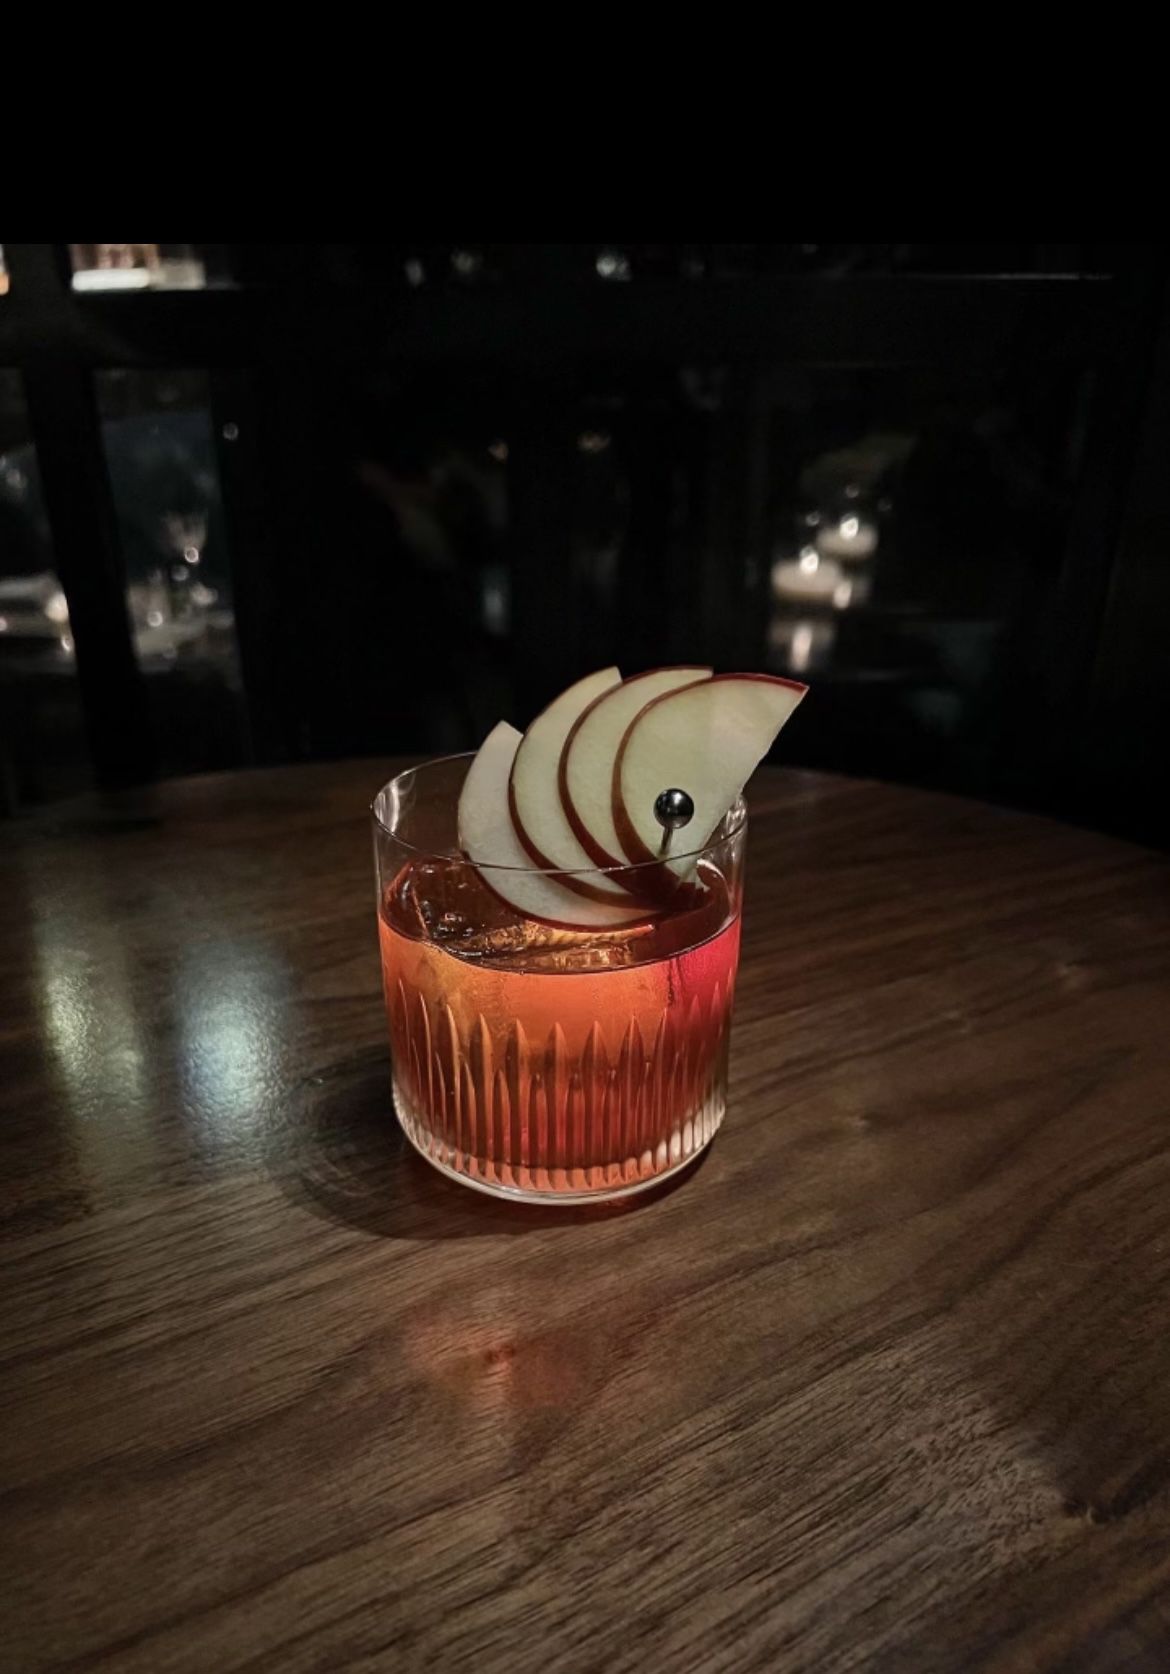 A cocktail garnished with apples.